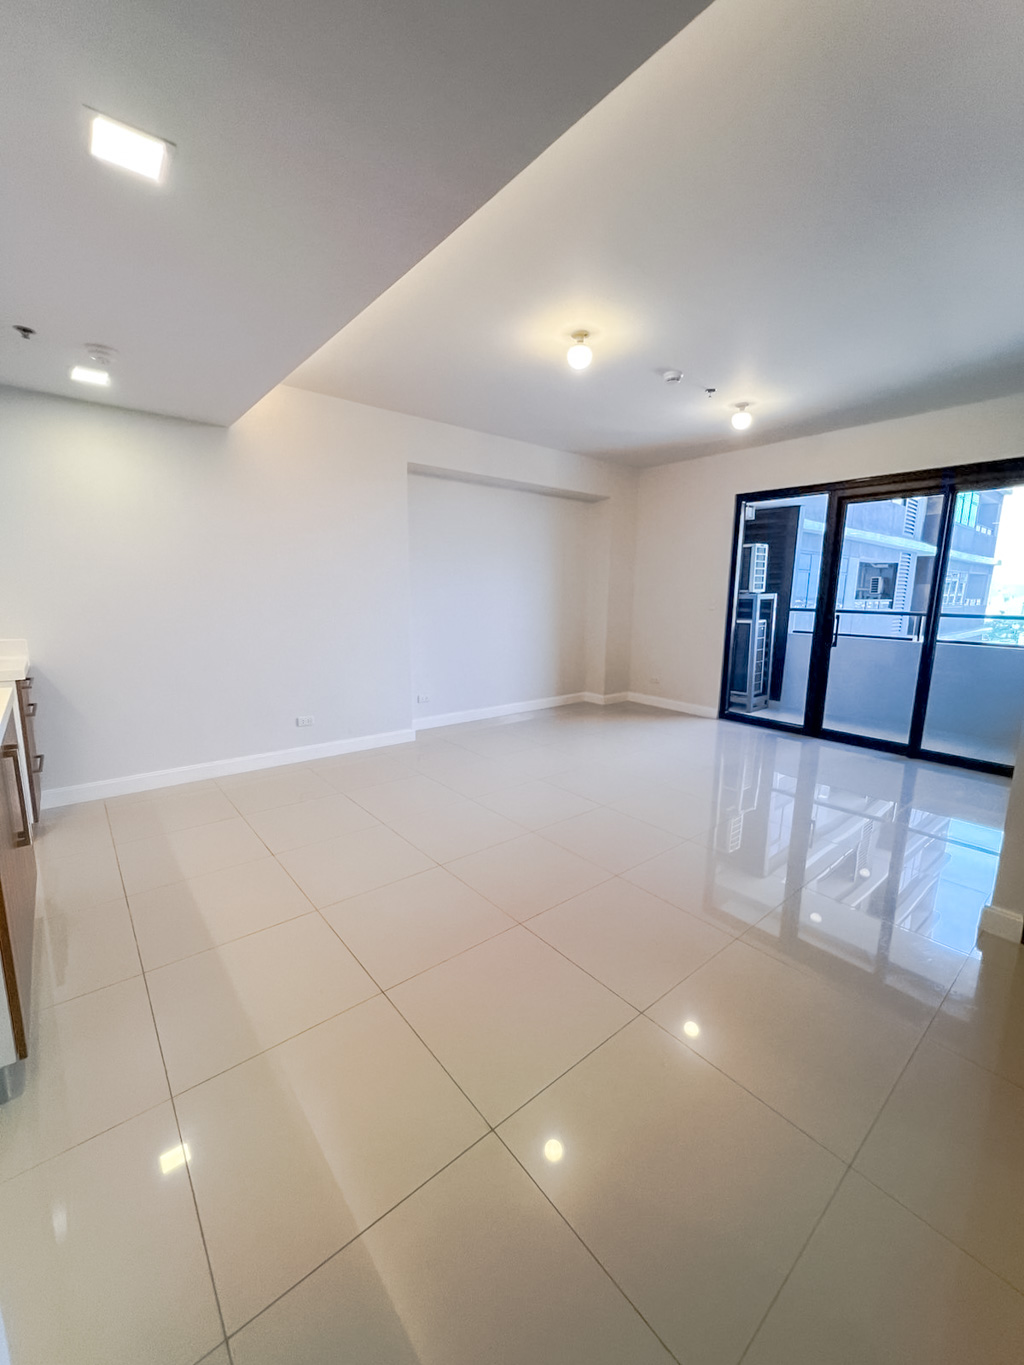 RCALC15 Unfurnished 1 Bedroom Condo for Rent in Cebu Business Park - 1